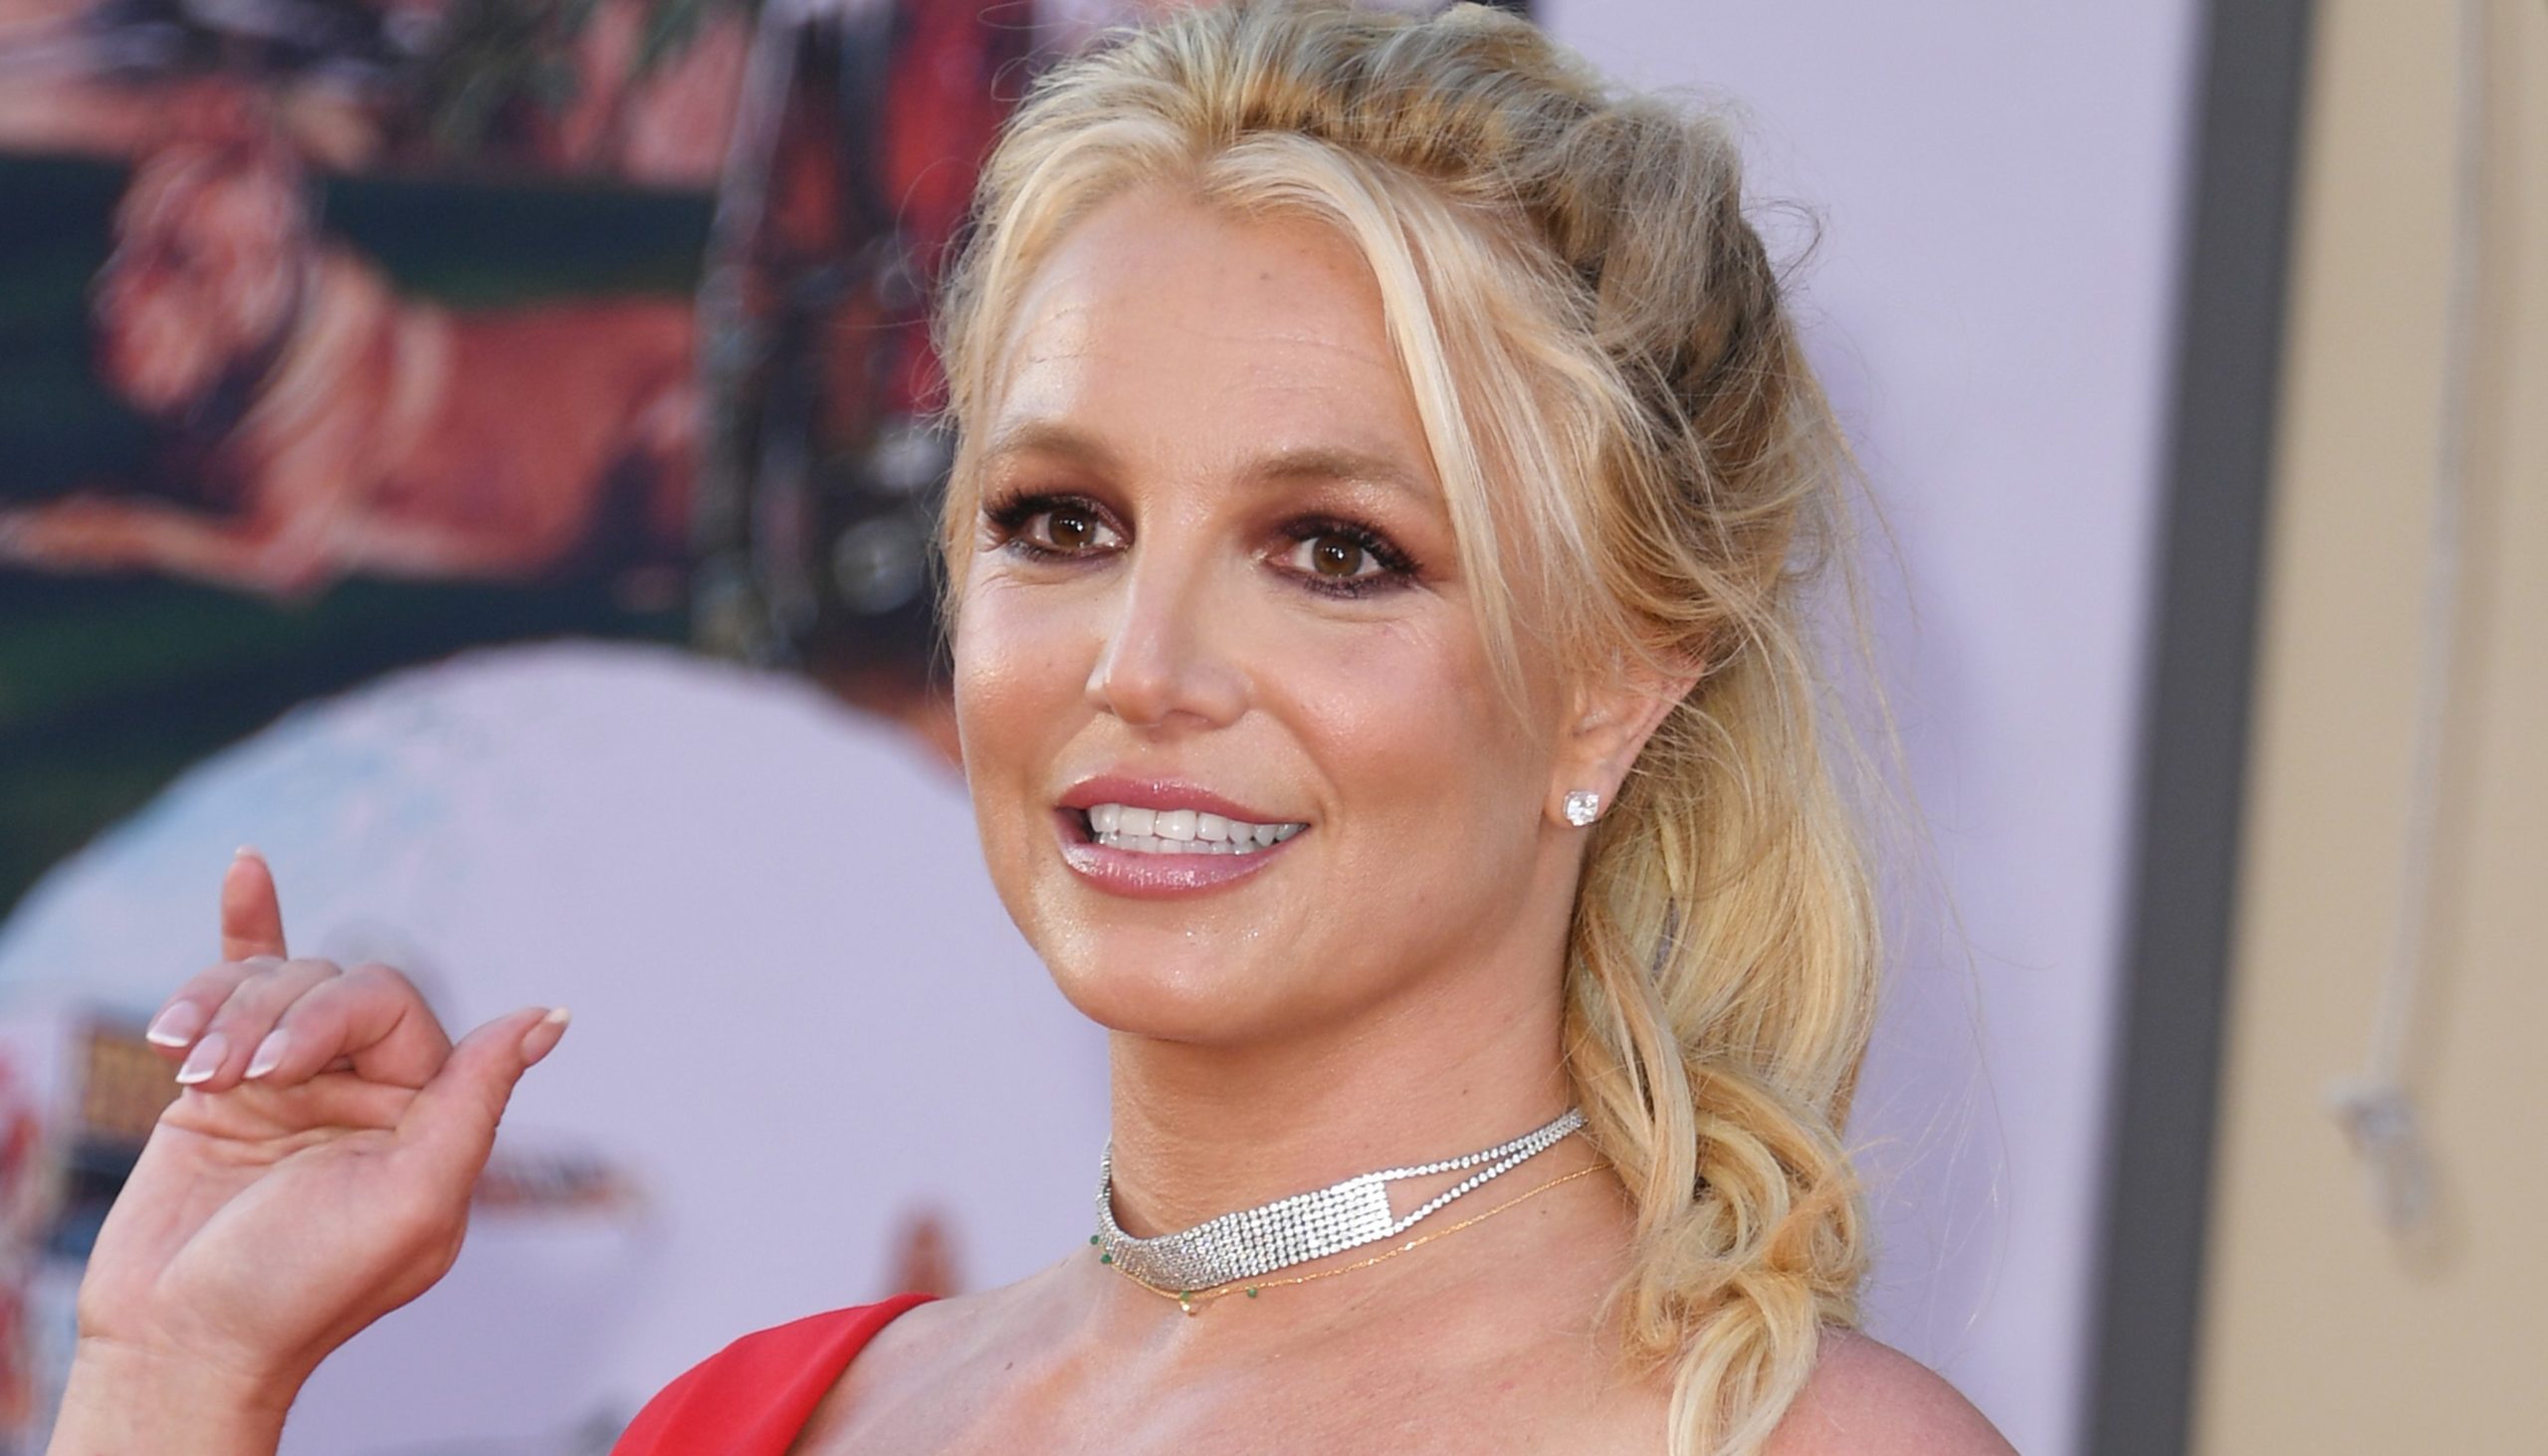 Britney Spears Reveals Natural Freckles in Filter-Free Photo